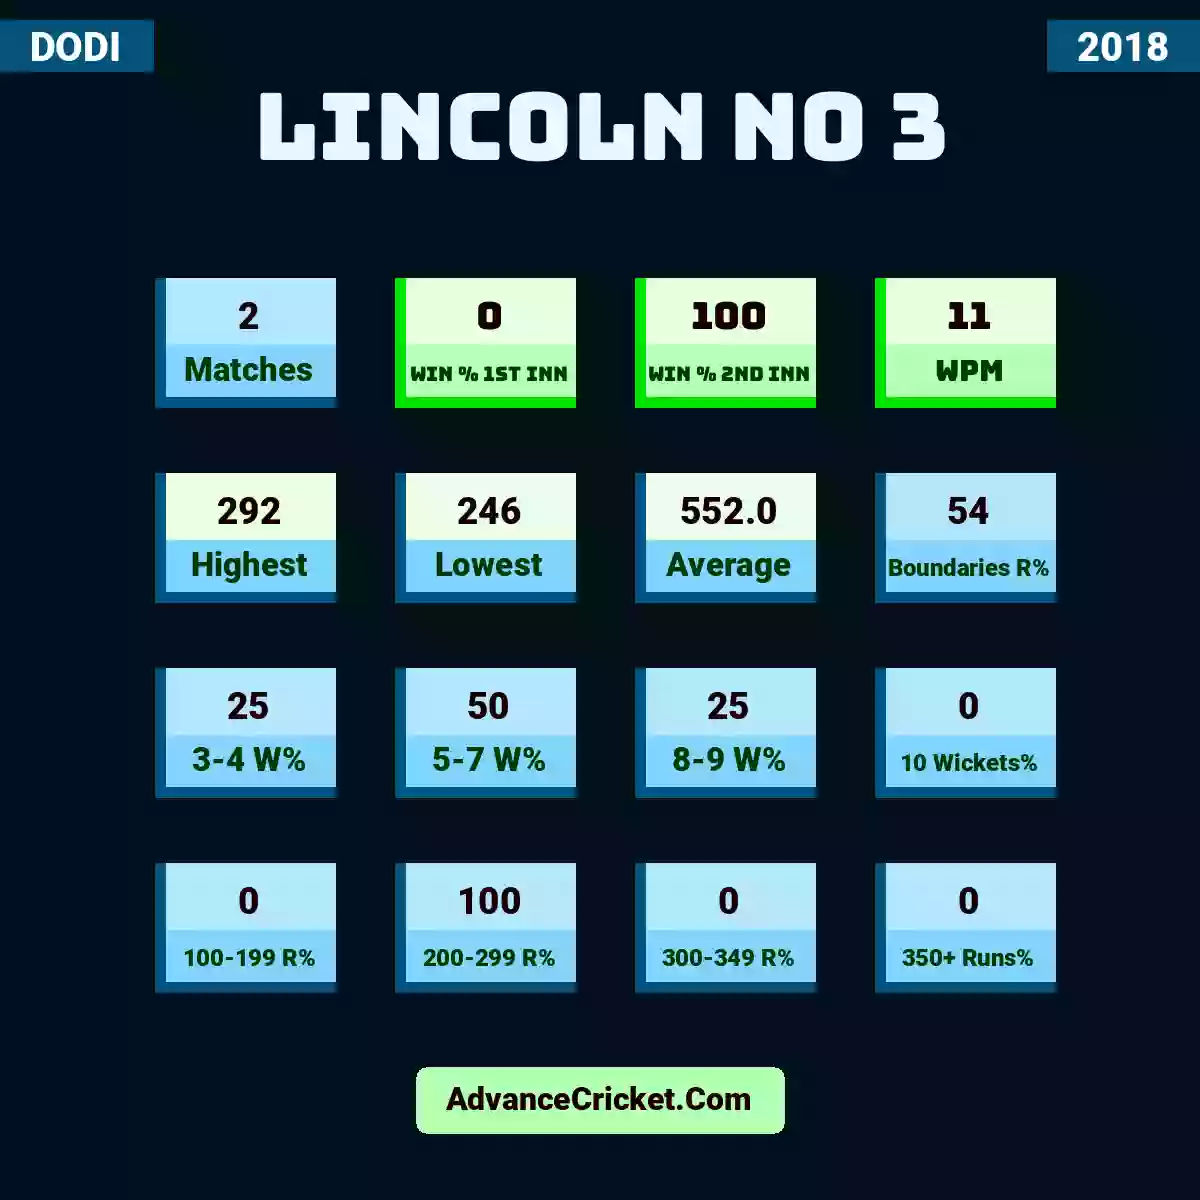 Image showing Lincoln No 3 with Matches: 2, Win % 1st Inn: 0, Win % 2nd Inn: 100, WPM: 11, Highest: 292, Lowest: 246, Average: 552.0, Boundaries R%: 54, 3-4 W%: 25, 5-7 W%: 50, 8-9 W%: 25, 10 Wickets%: 0, 100-199 R%: 0, 200-299 R%: 100, 300-349 R%: 0, 350+ Runs%: 0.